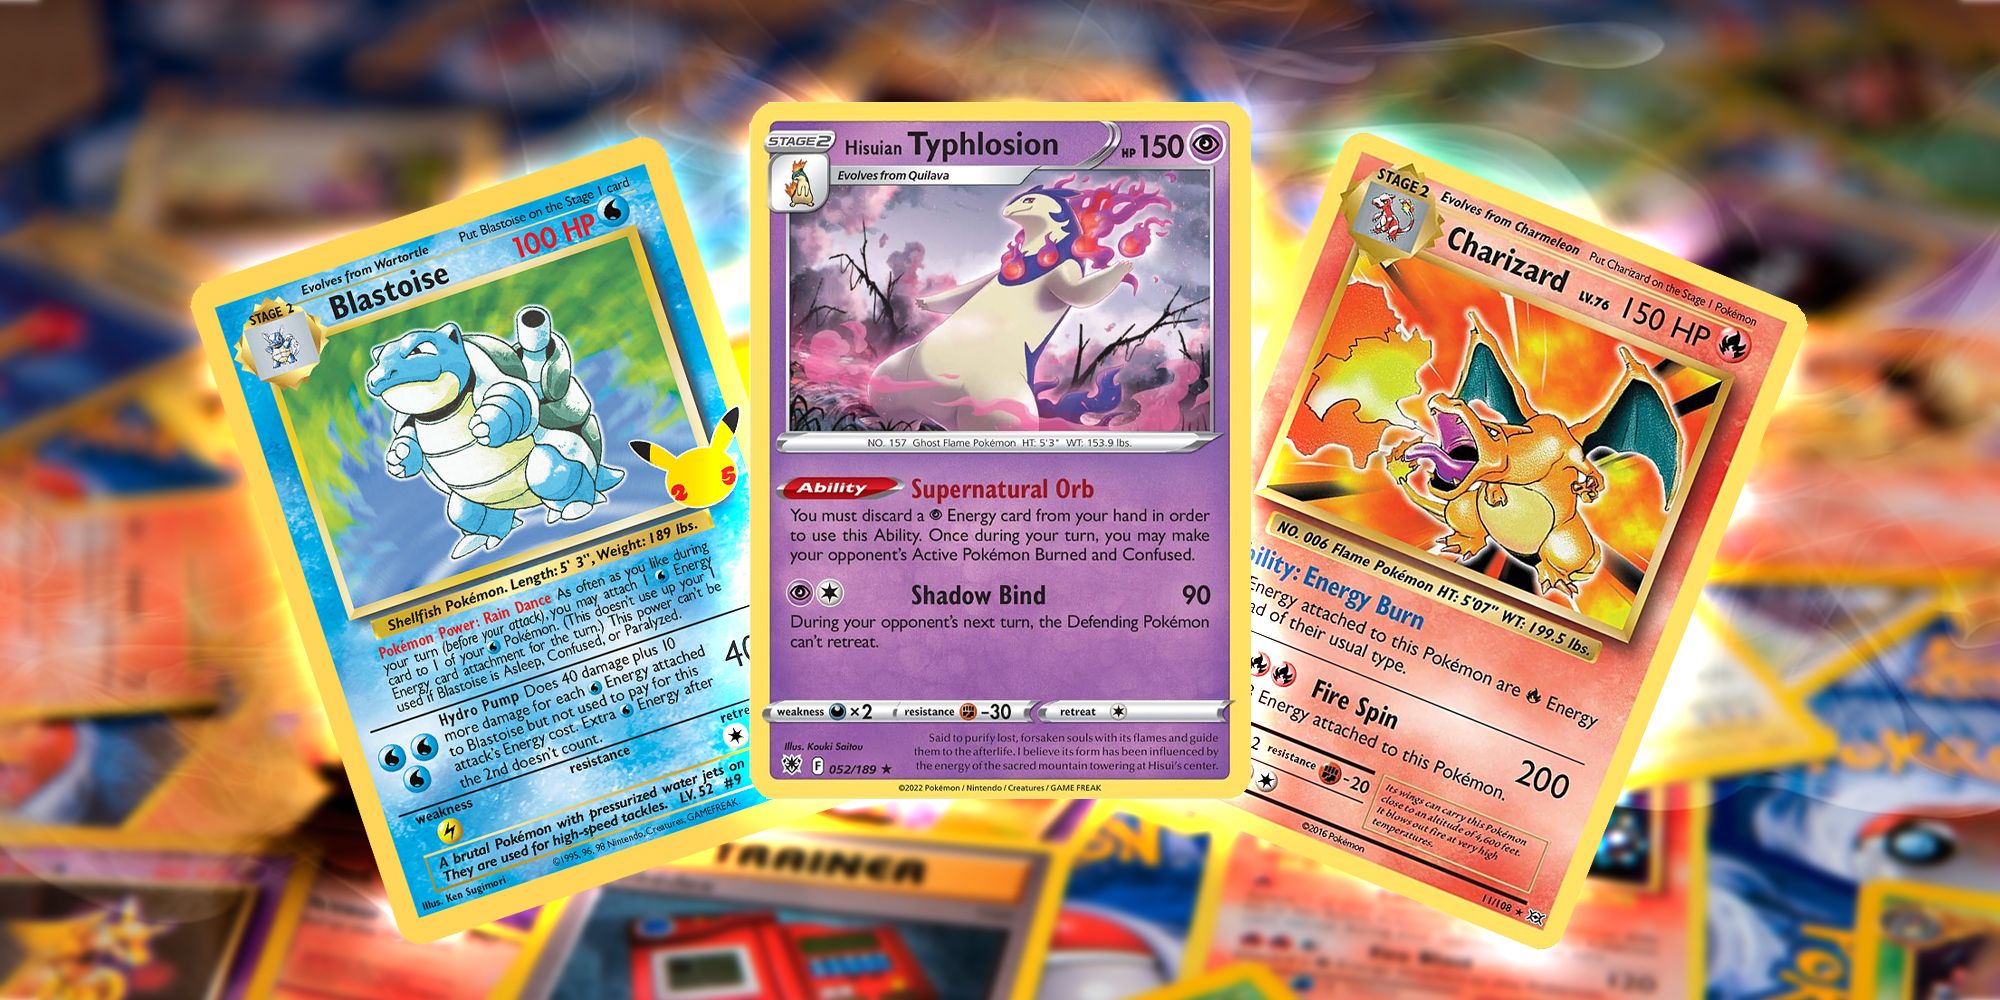 10 Classic Pokémon Cards You Wish You'd Held On To (& What They're Worth